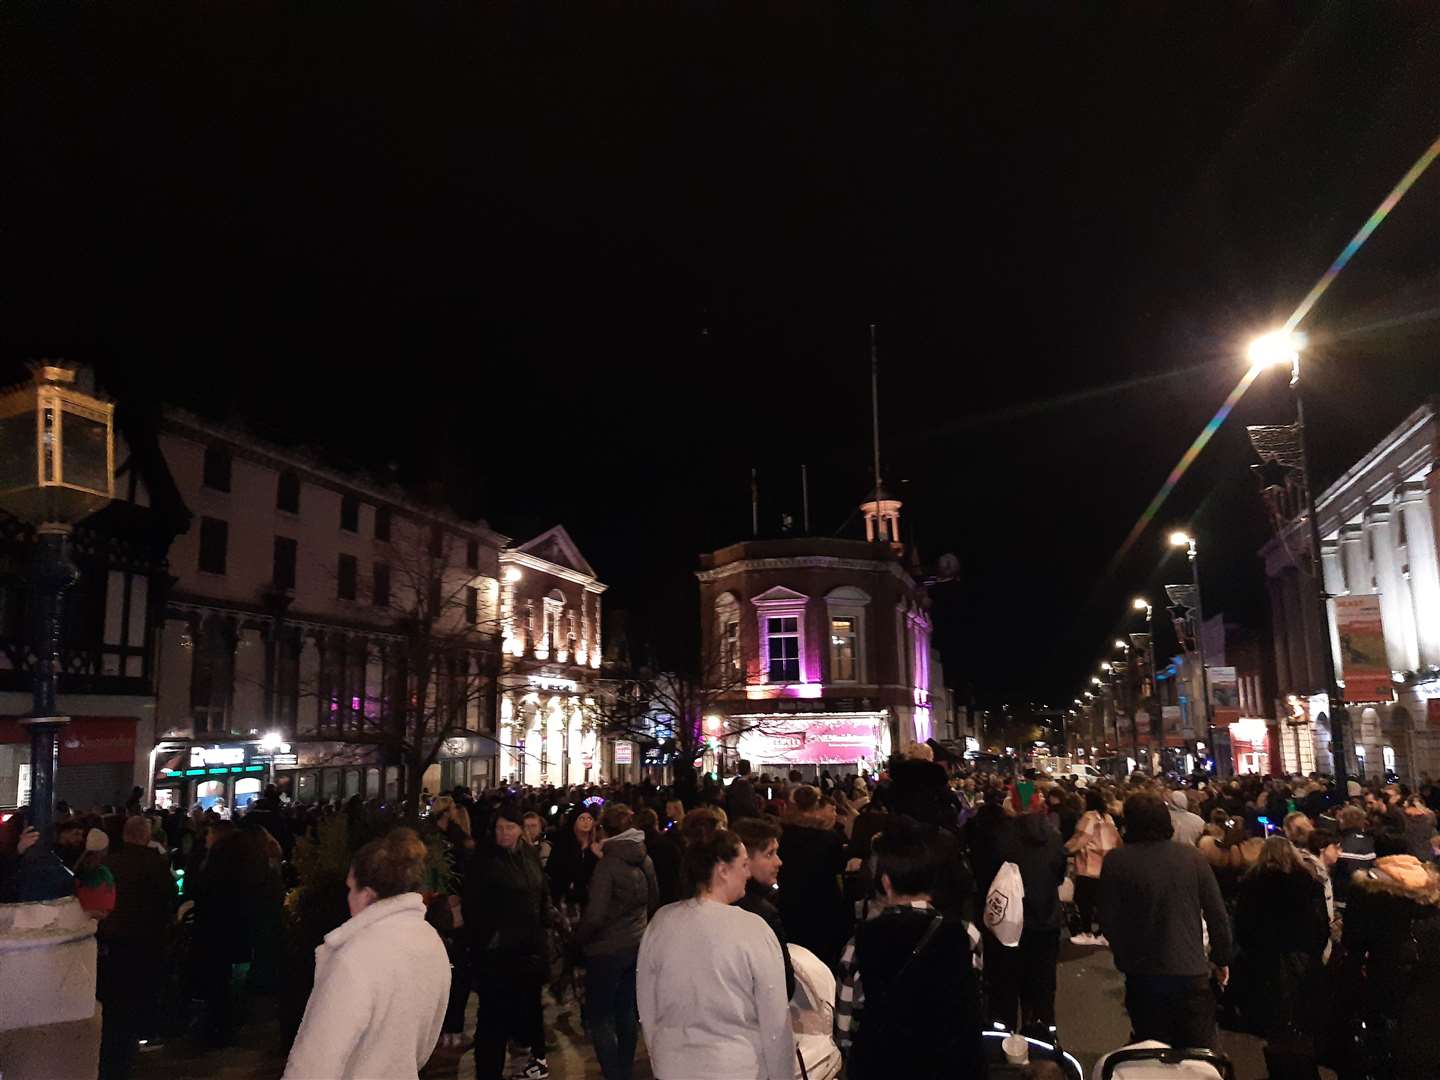 A crowd stretched far back at the Maidstone Christmas lights switch on 2021